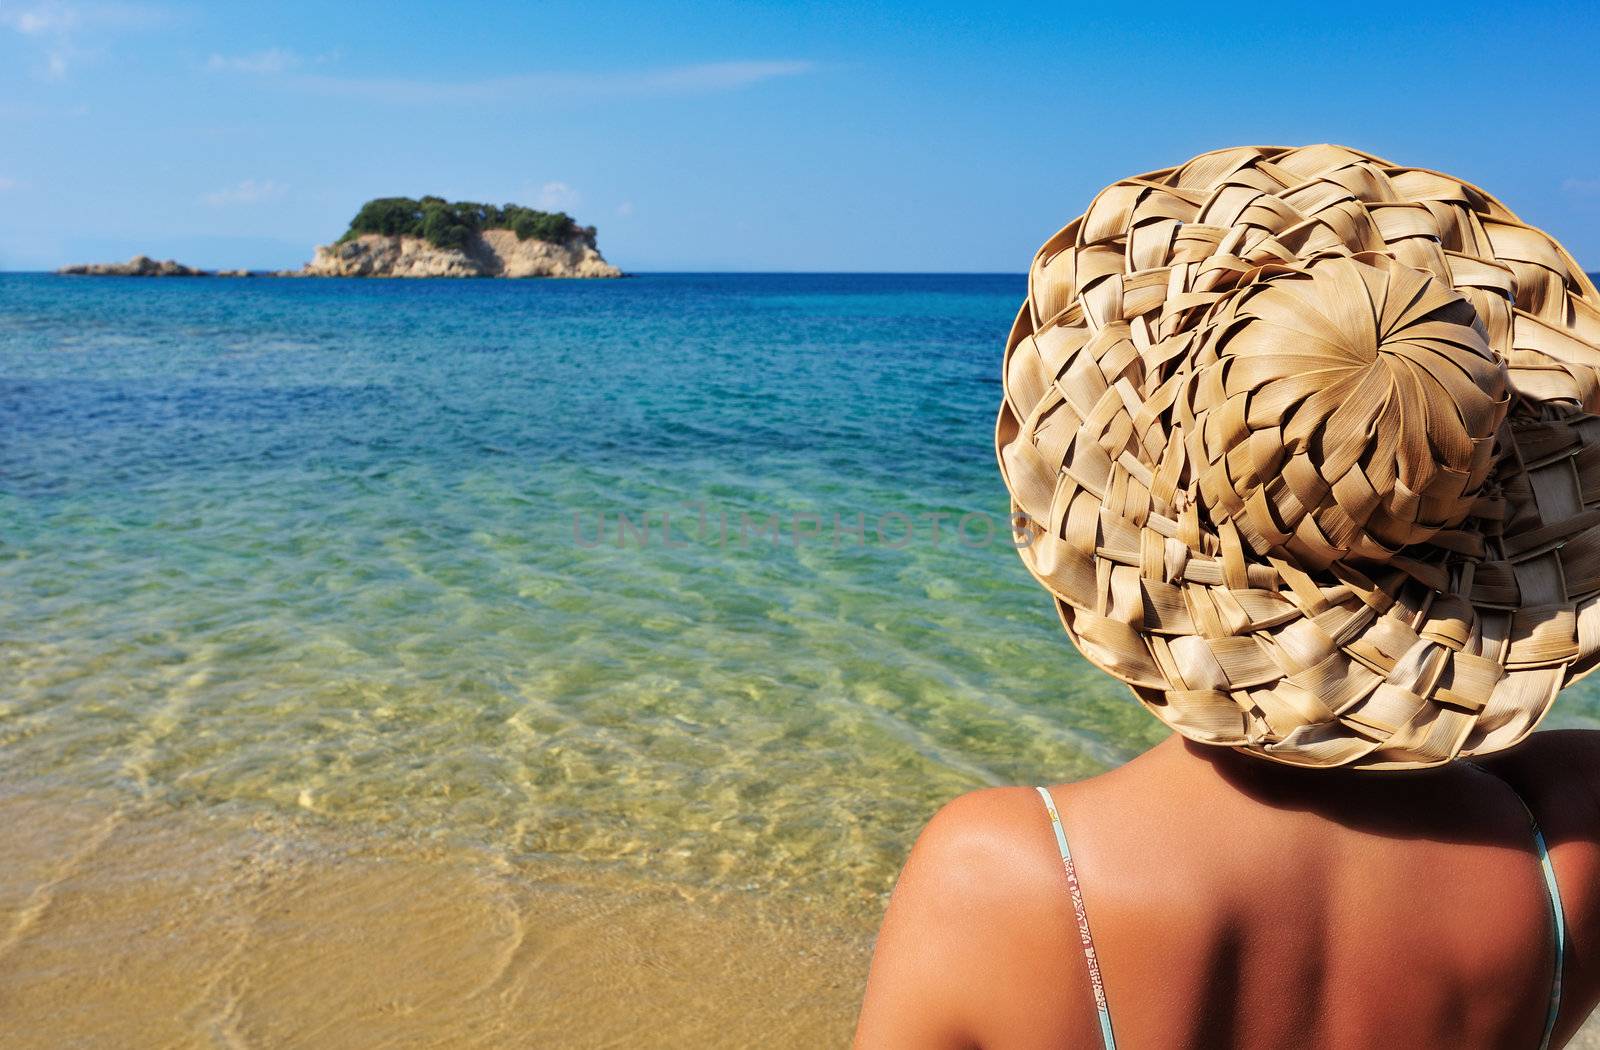 Closeup image of a young woman in a straw hat and bikini, looking at a tiny island in the Mediterranean